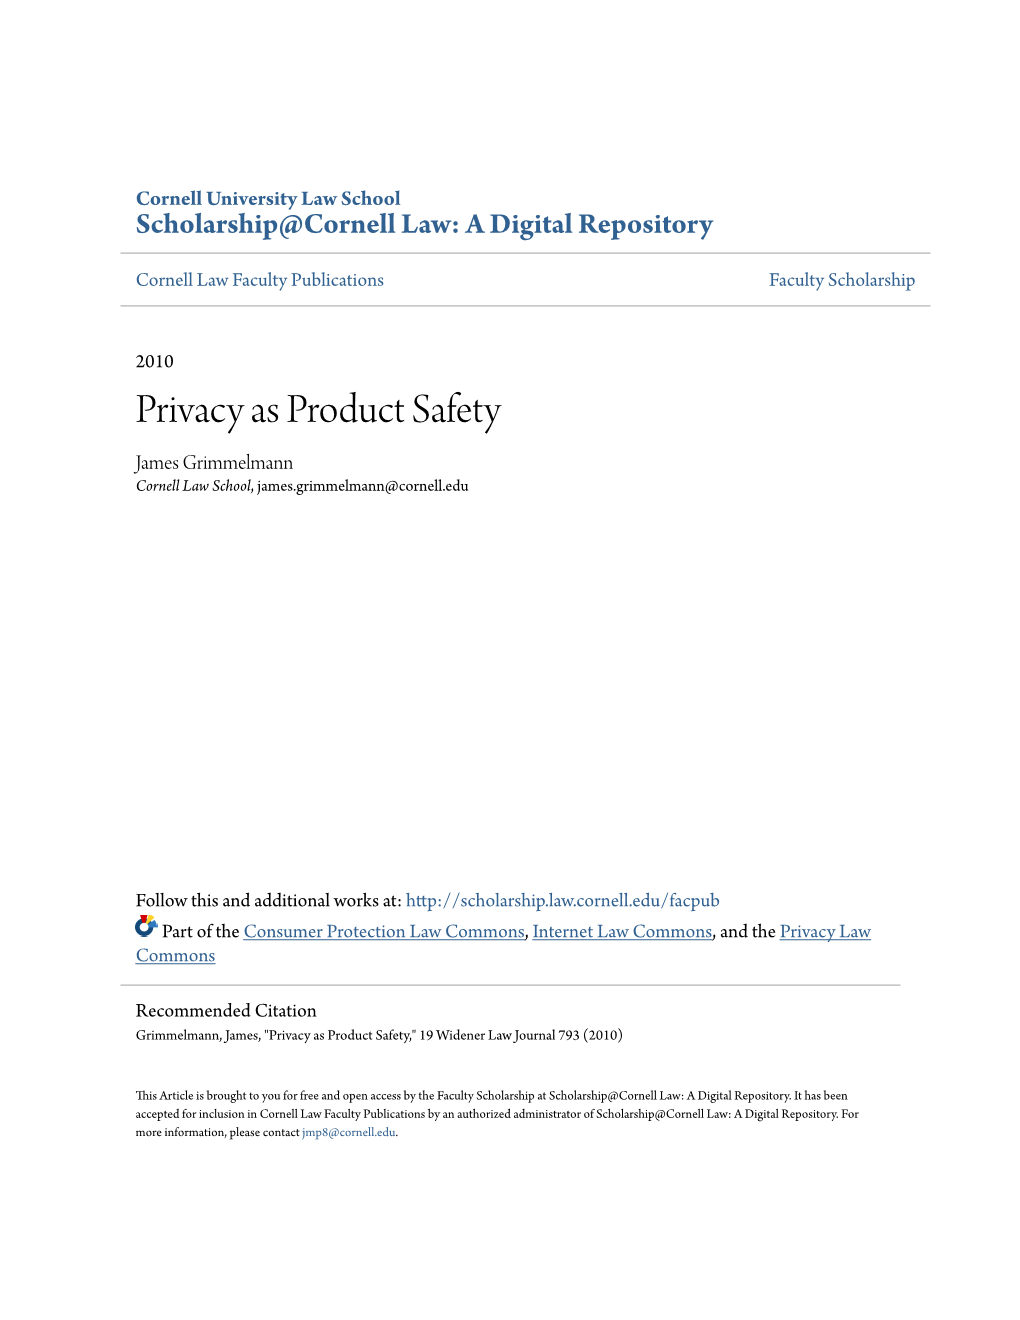 Privacy As Product Safety James Grimmelmann Cornell Law School, James.Grimmelmann@Cornell.Edu